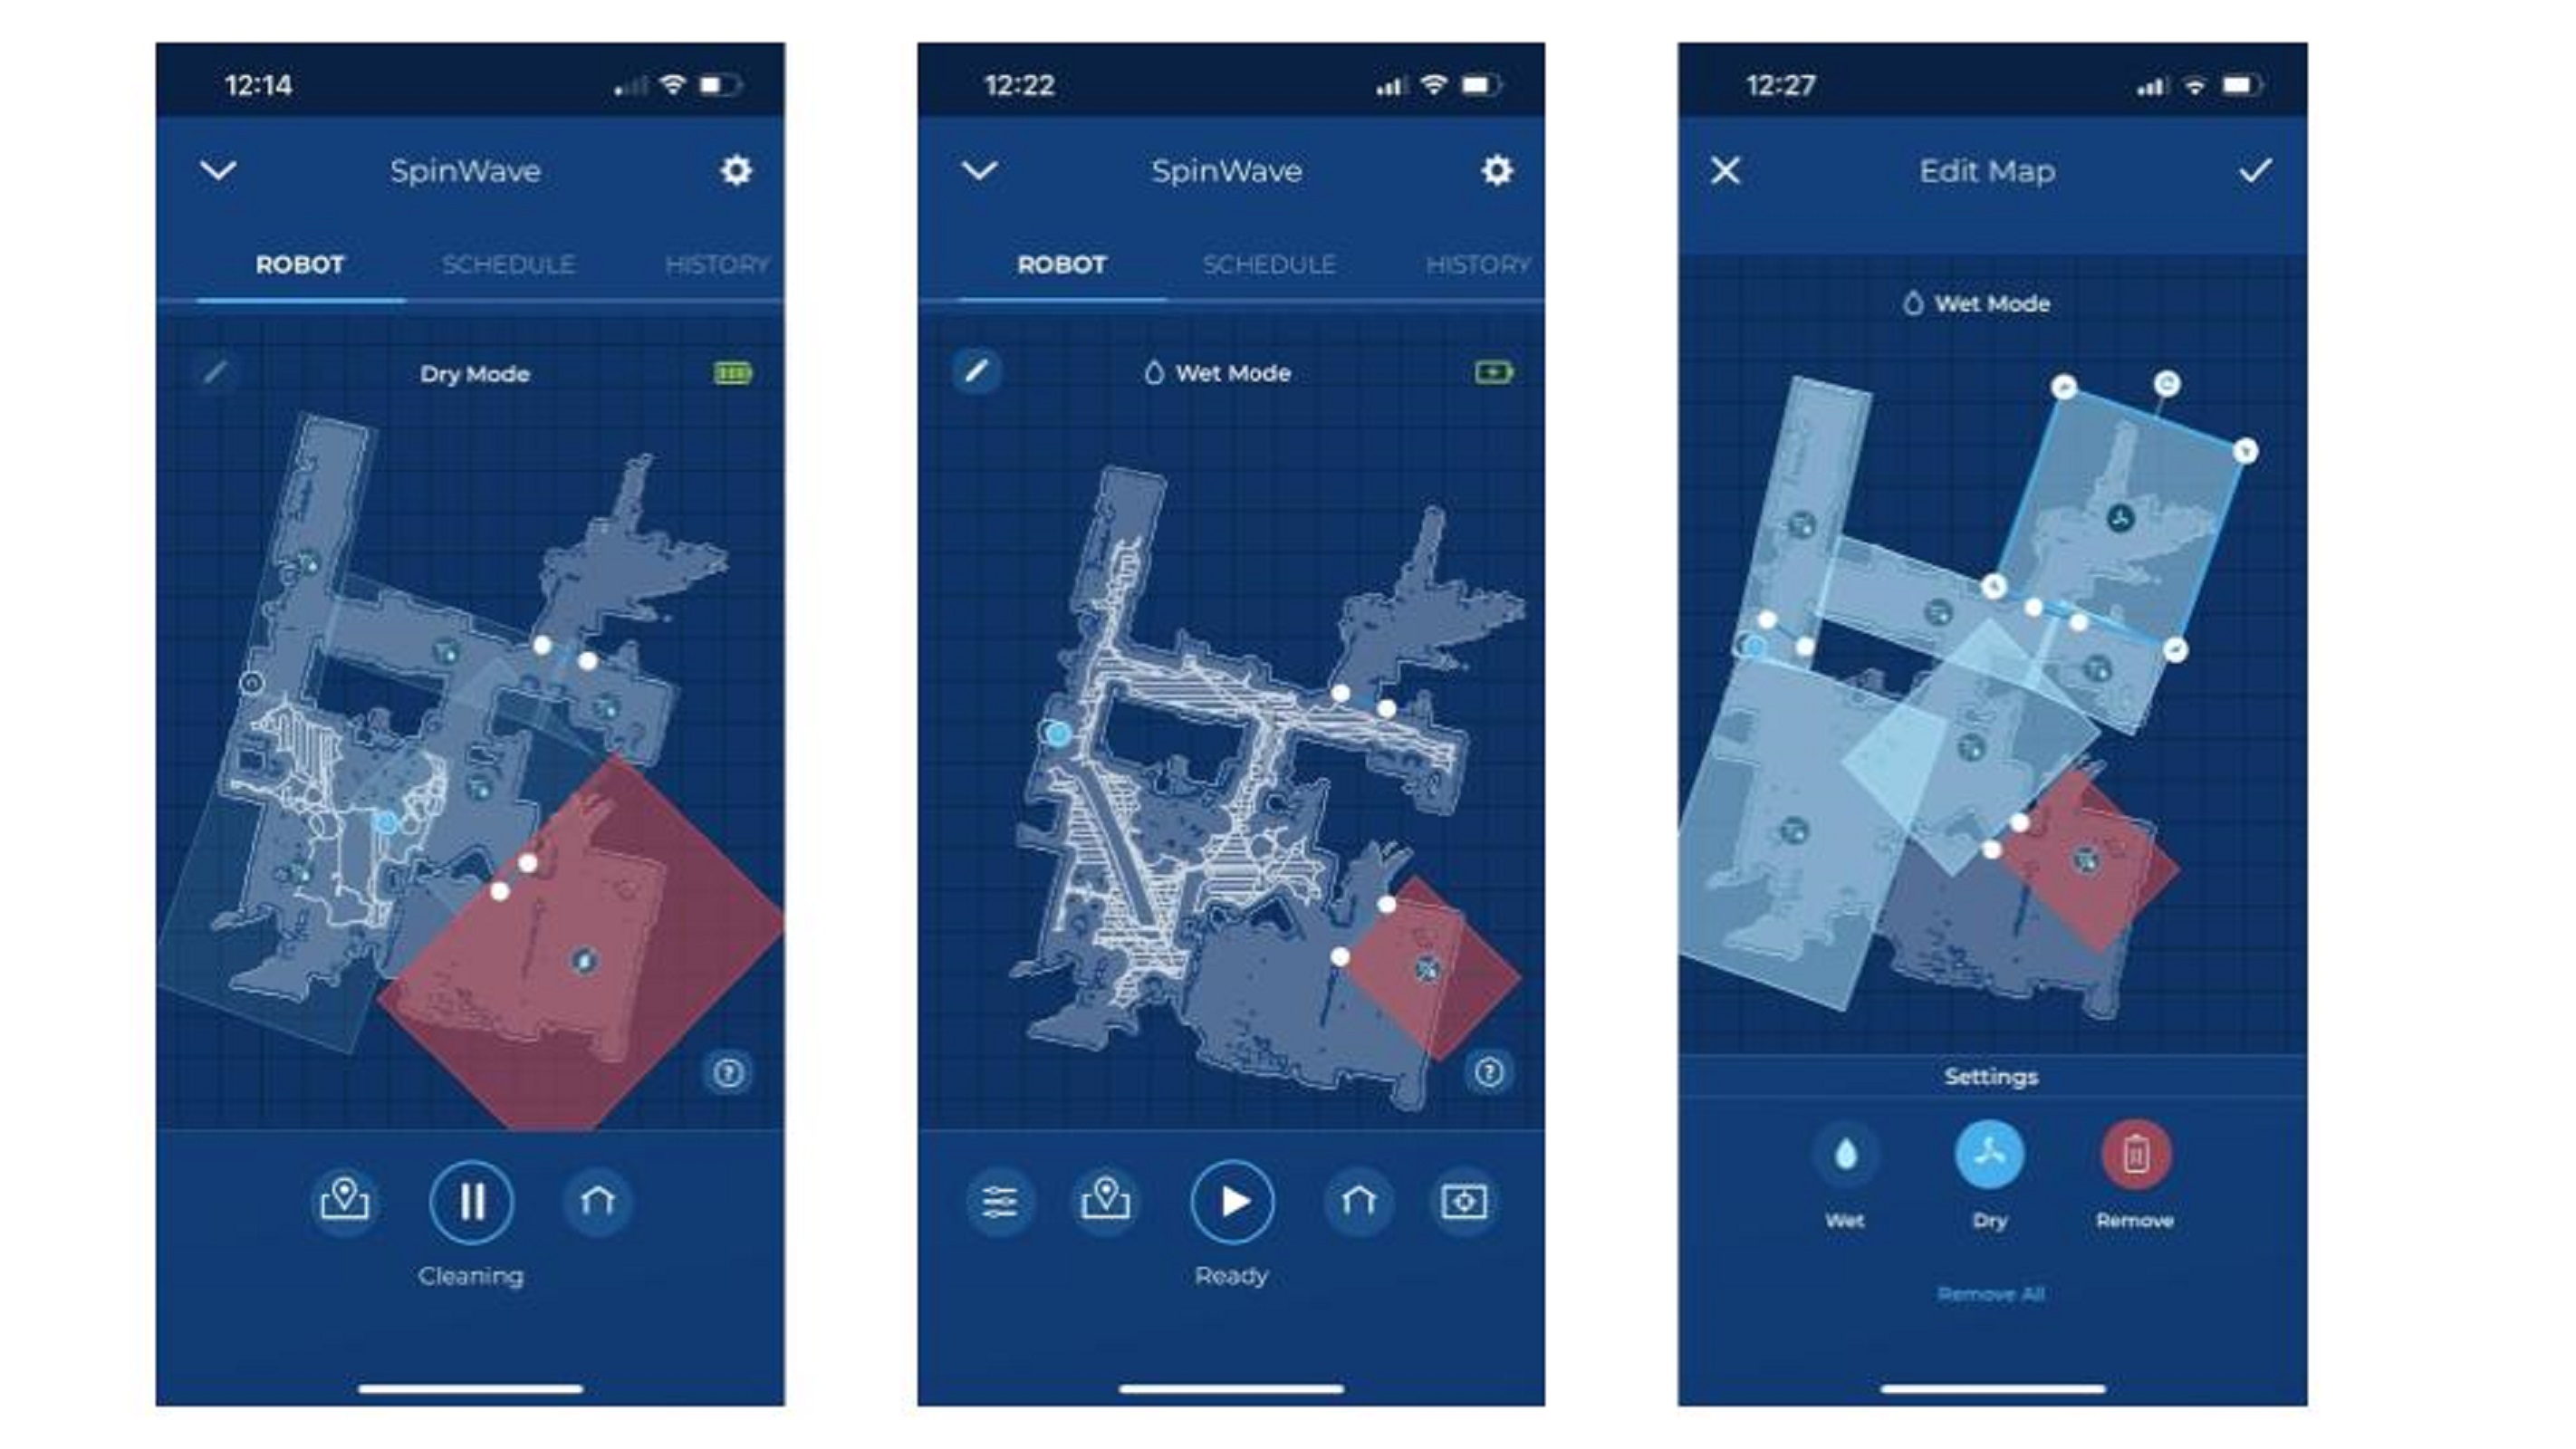 cleaning zones and modes in the Bissell app